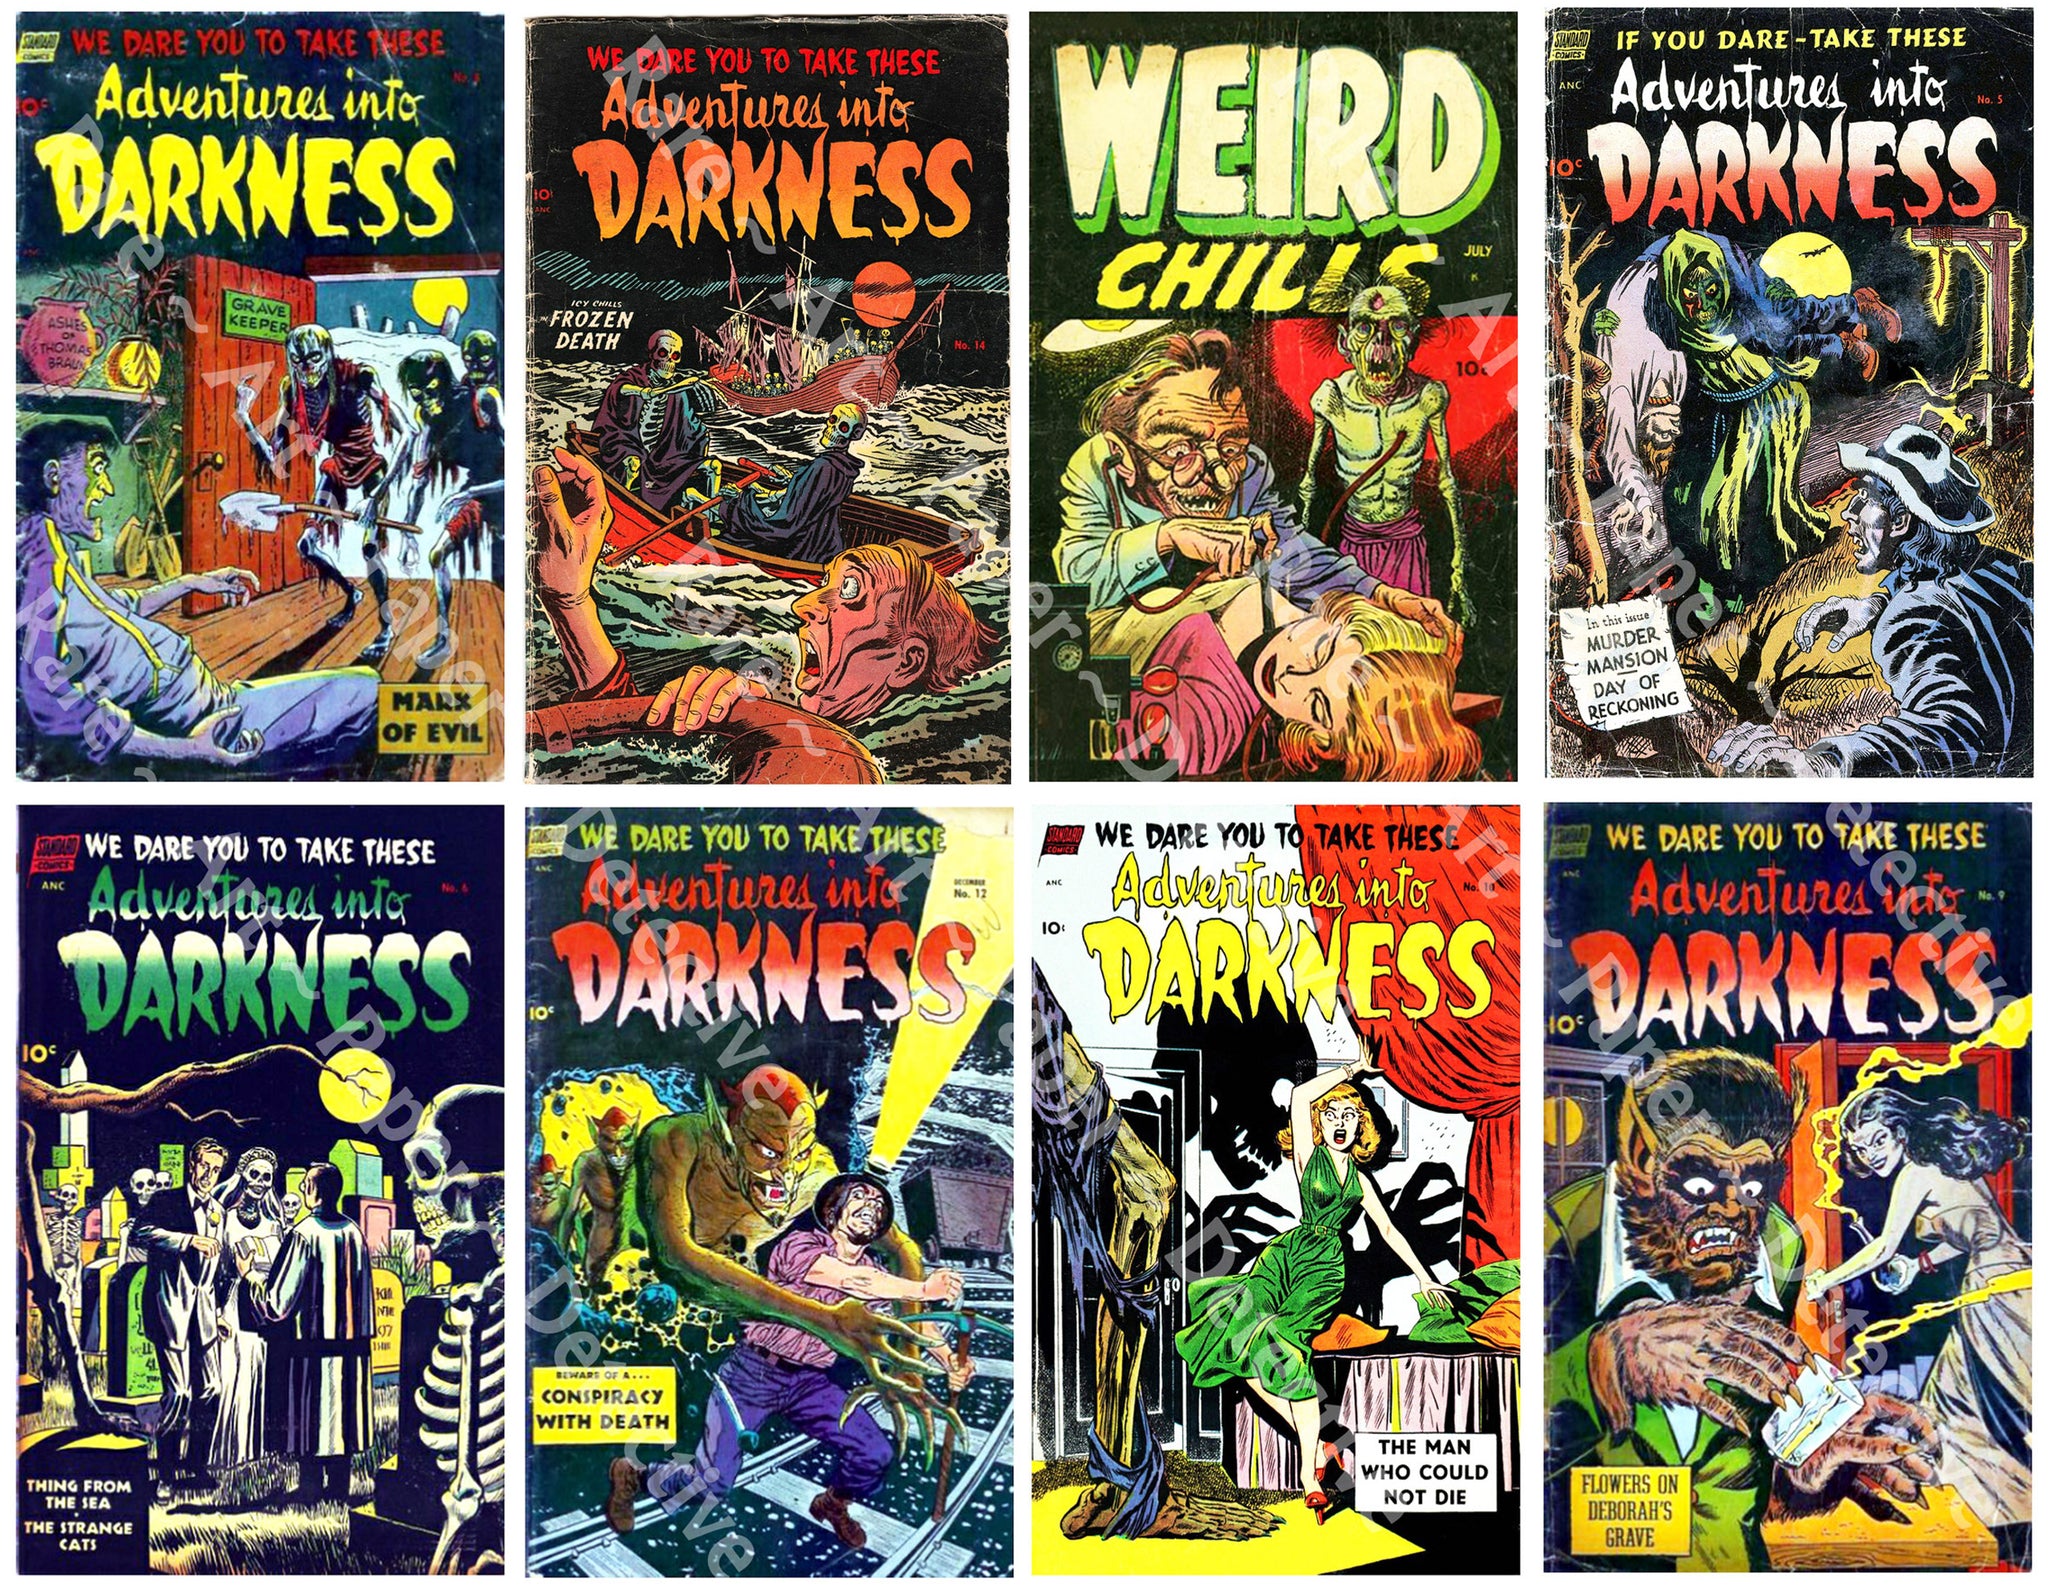 Comic Book Covers, Classic Horror Comics, Vintage Halloween Sticker Décor, 2.5" x 4" Tags, DIY Projects and Décor, CUT & PEEL Sheet, 1164